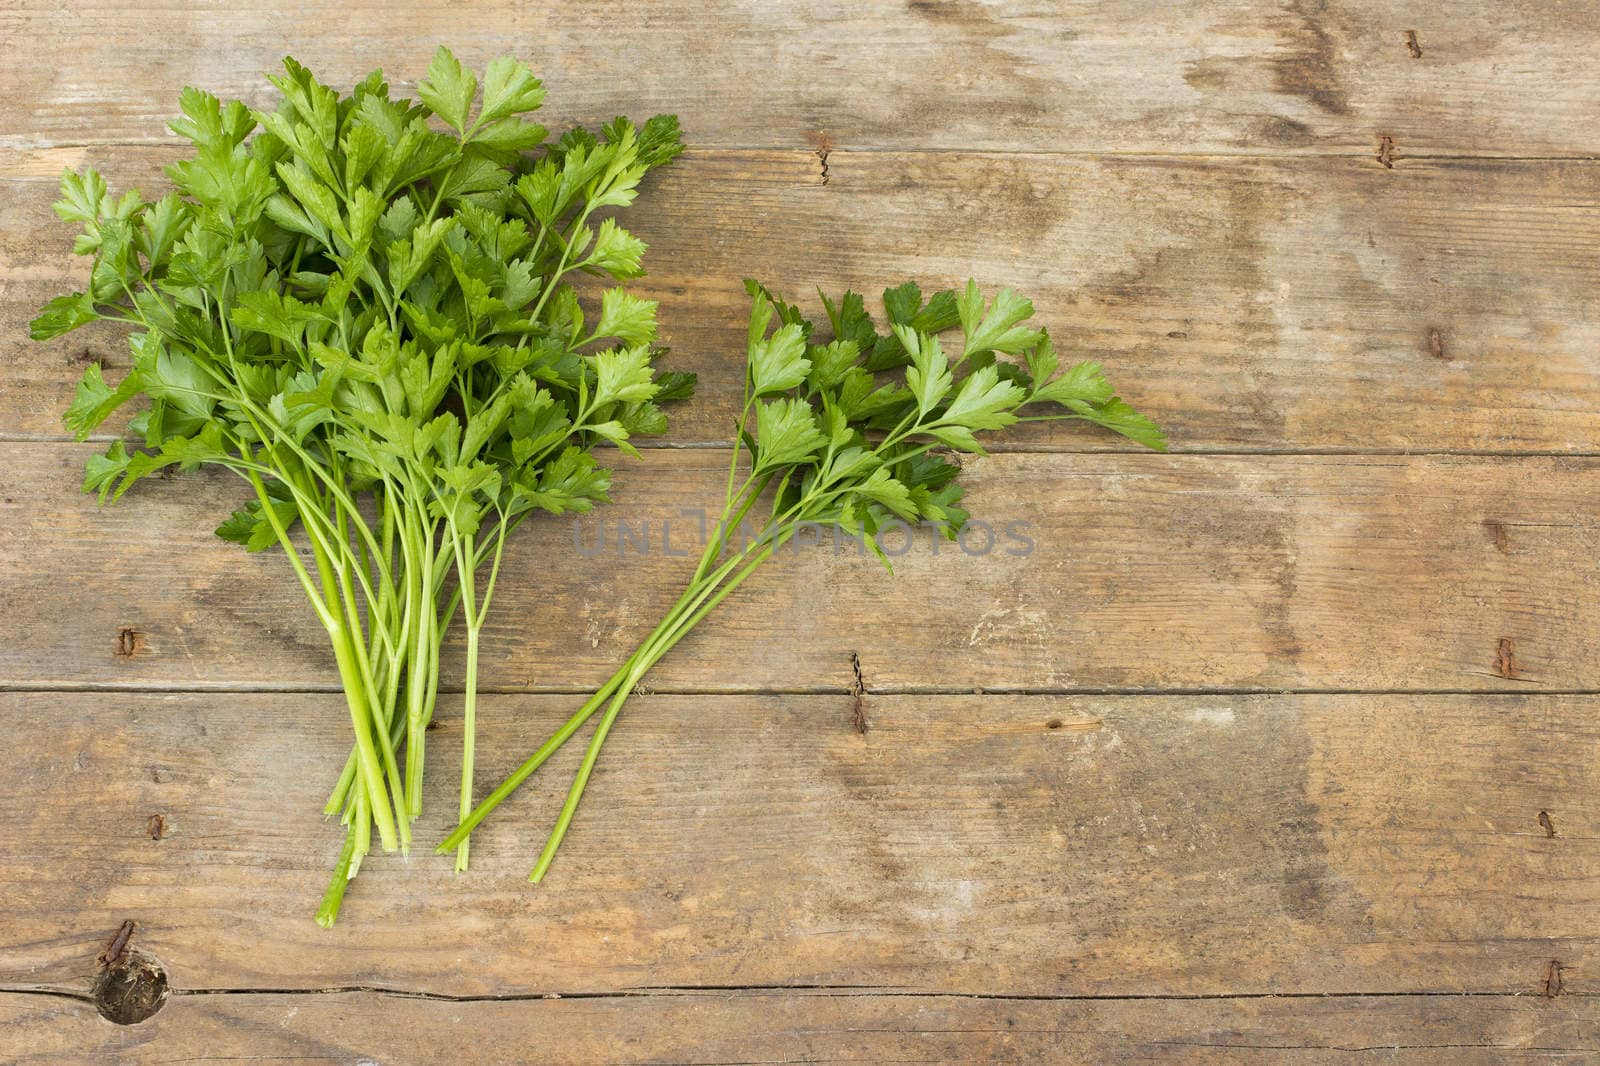 Green parsley bunch in wooden background